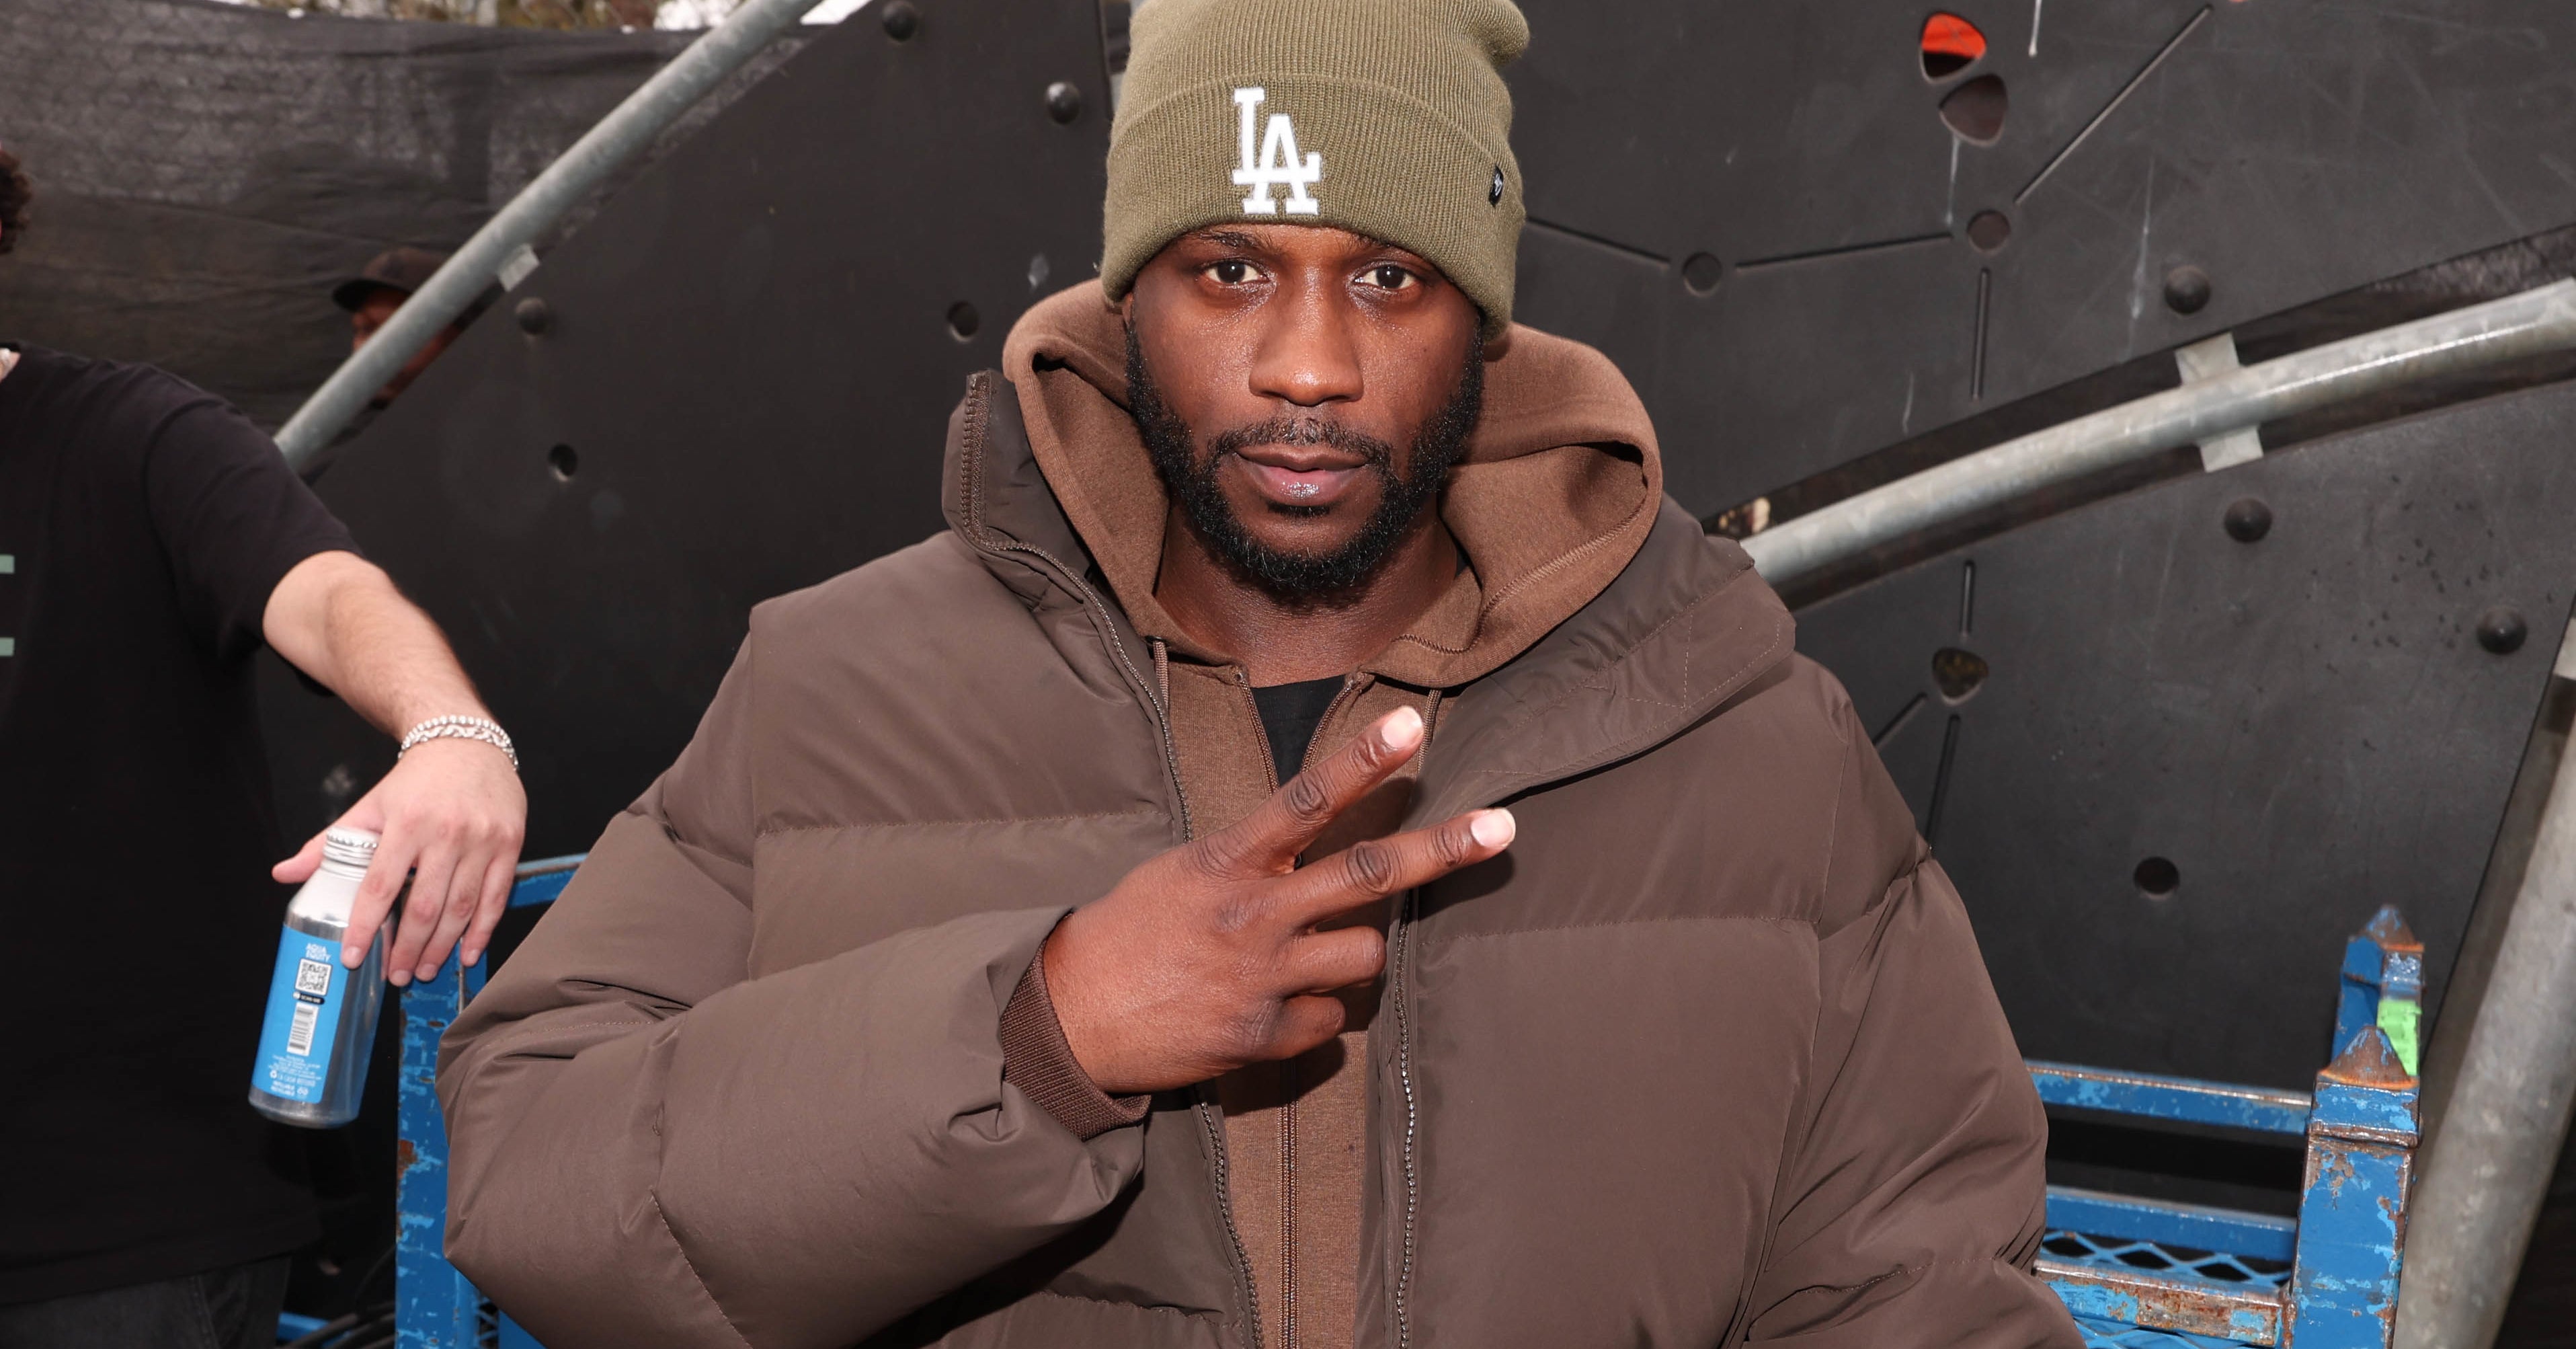 Jay Rock Says Top Dawg Entertainment Compilation Album Is Coming 'At the Top of the Year' #JayRock